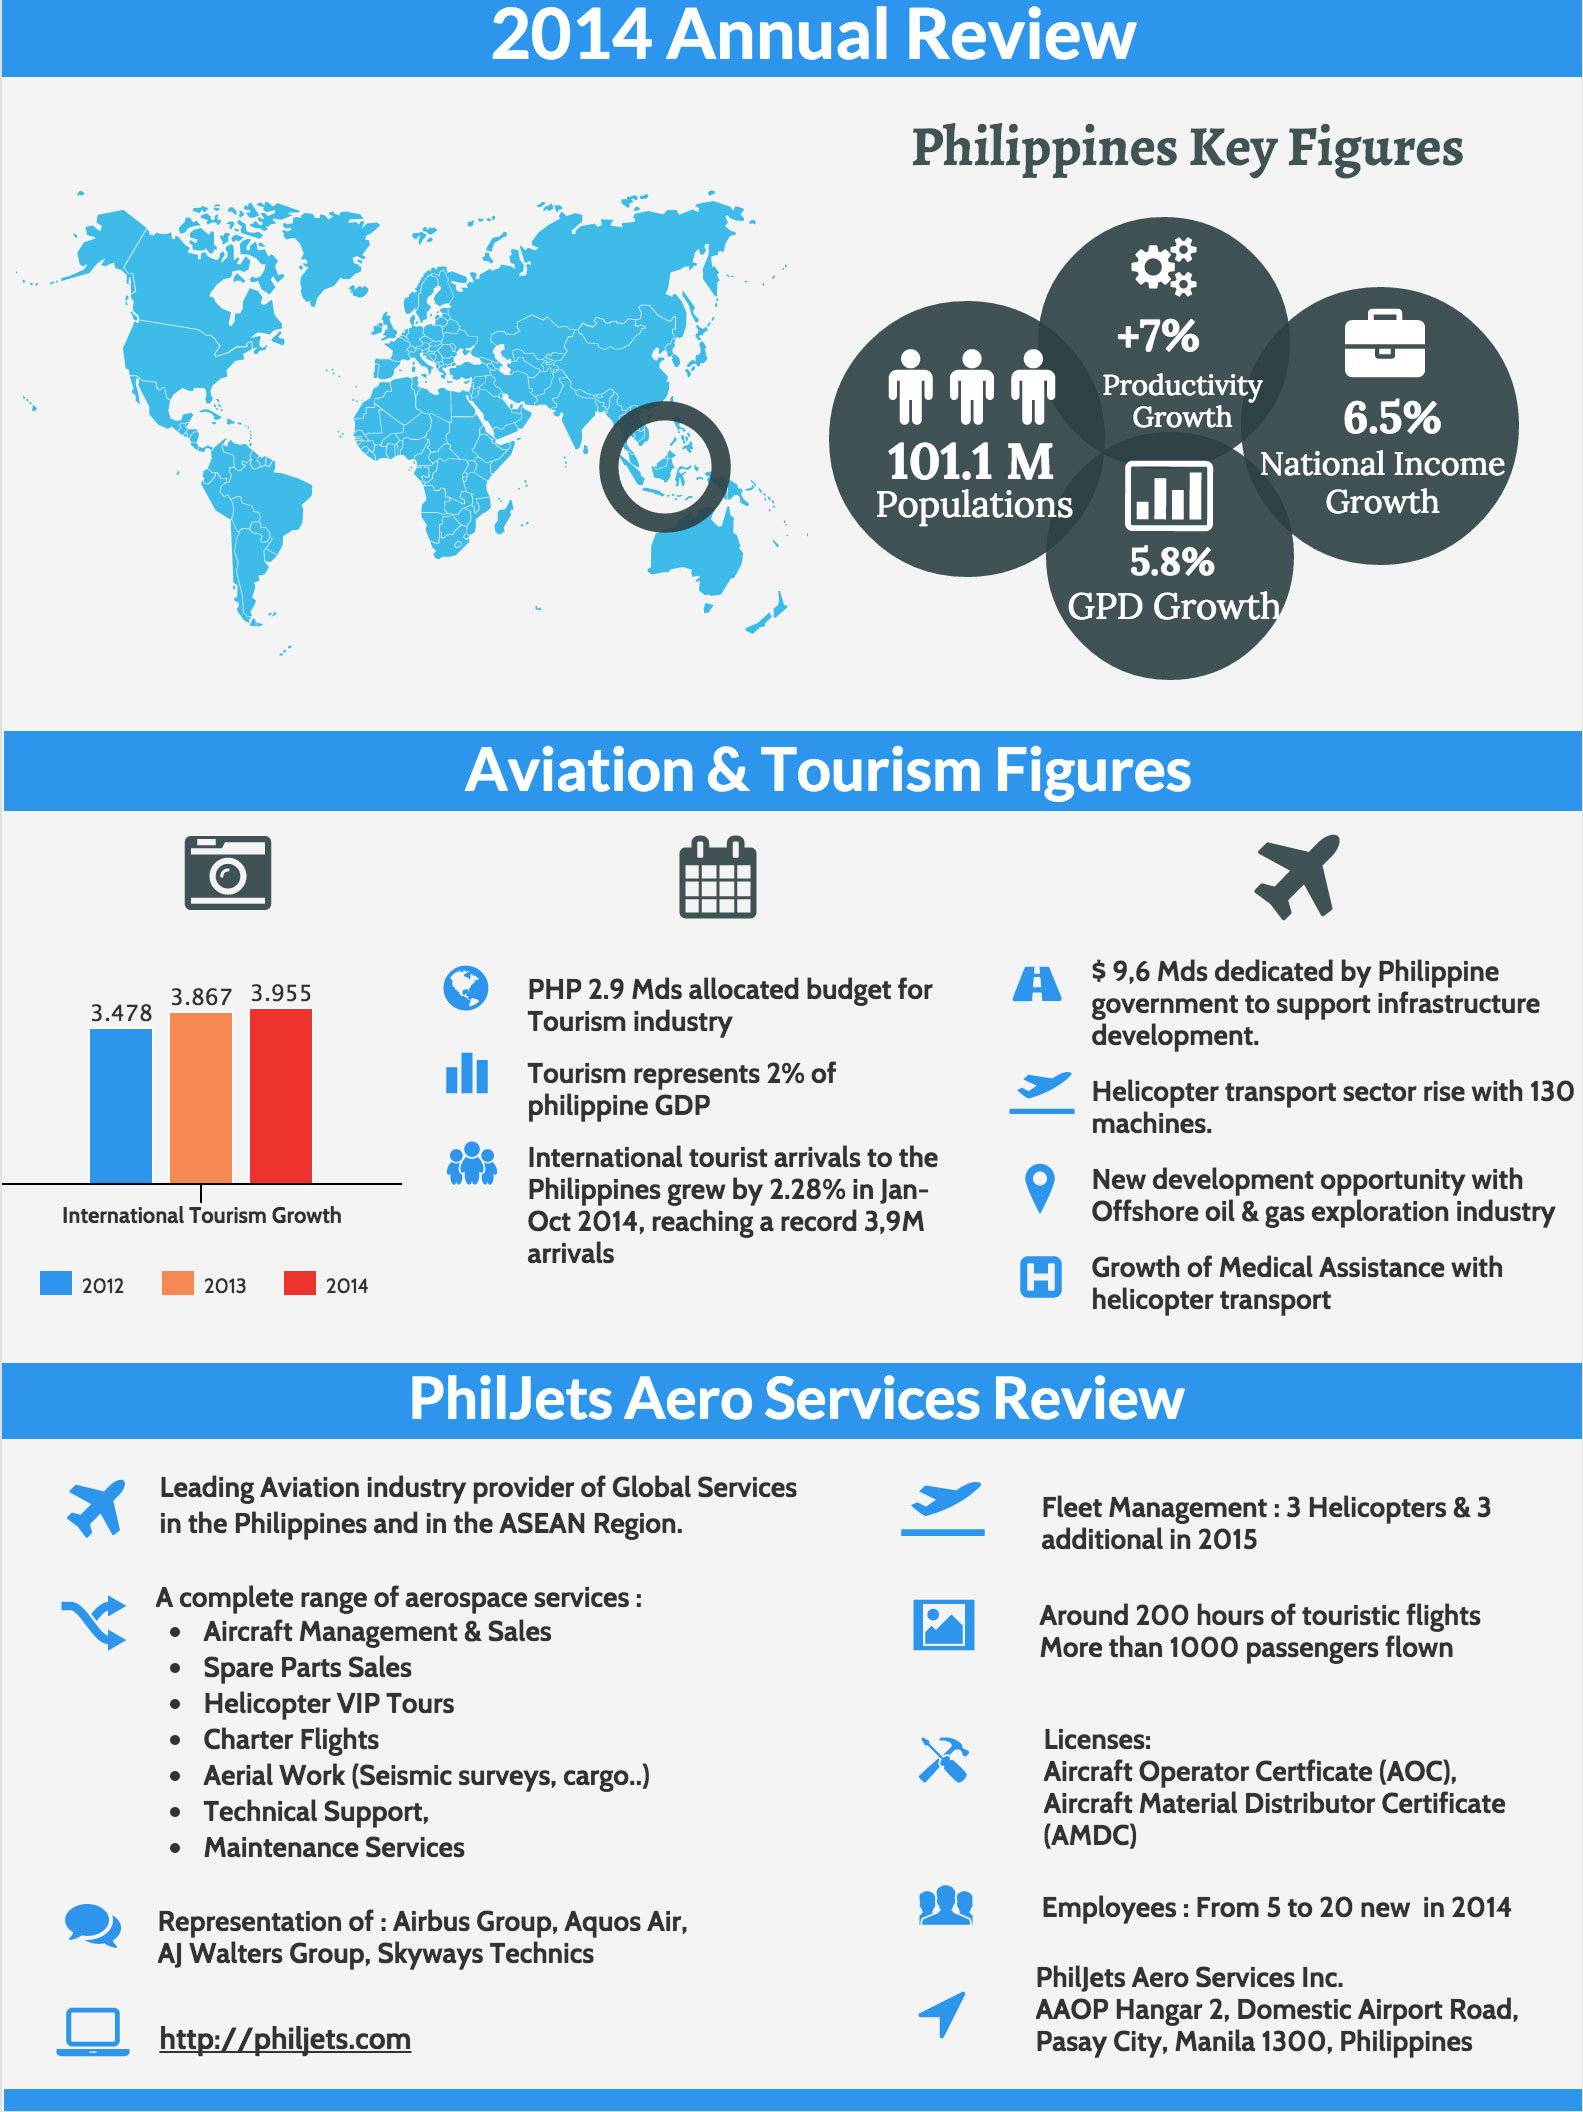 PhilJets_Year_2014_Annual_Review_Statistics_Tourism_Philippines